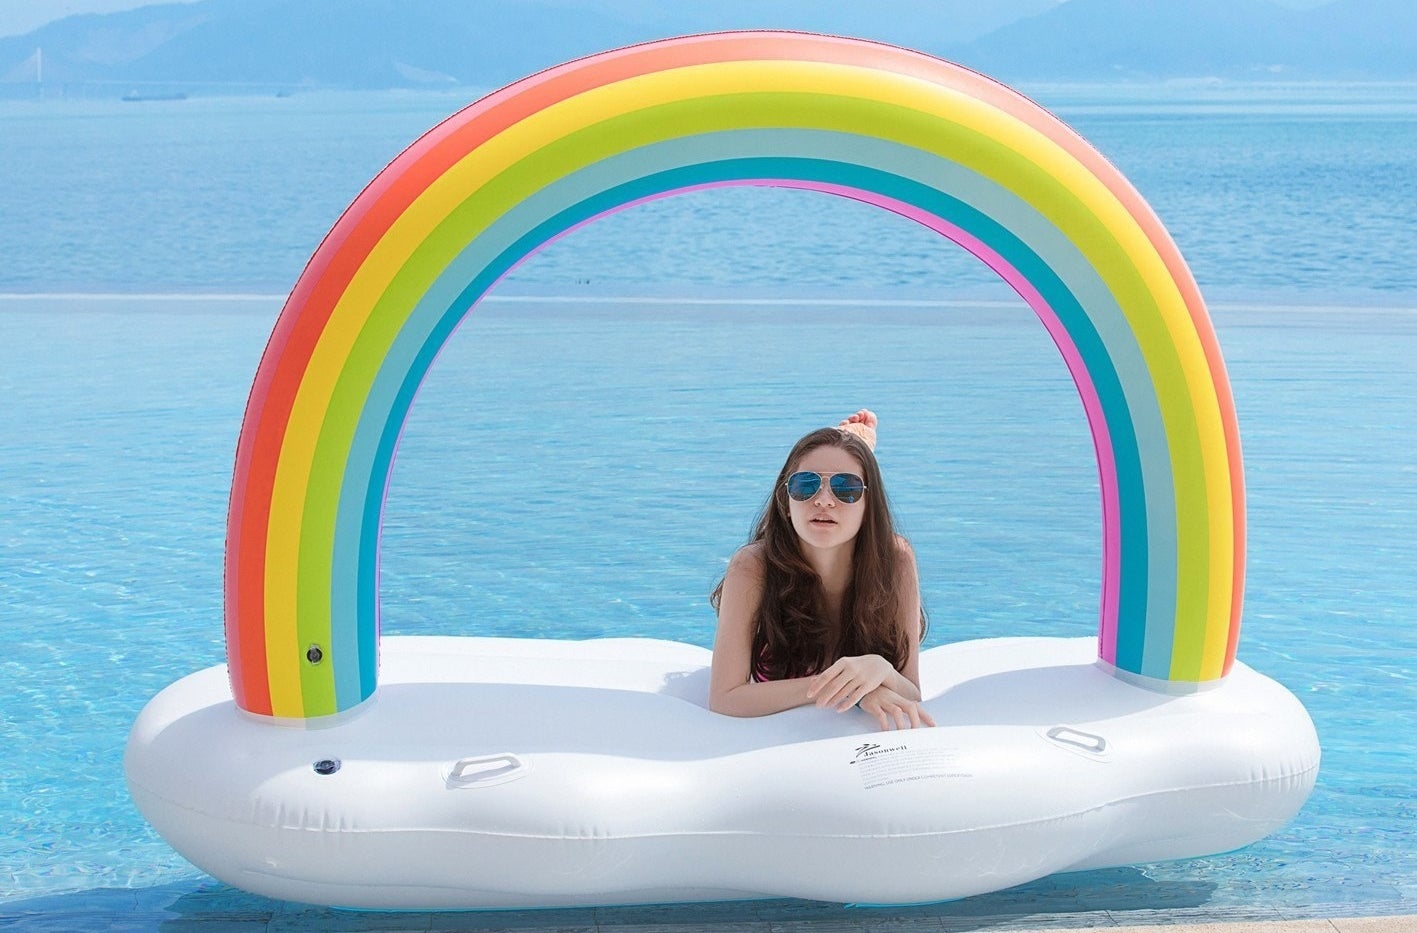 Promising review: "This is a very huge inflatable pool float with nice...